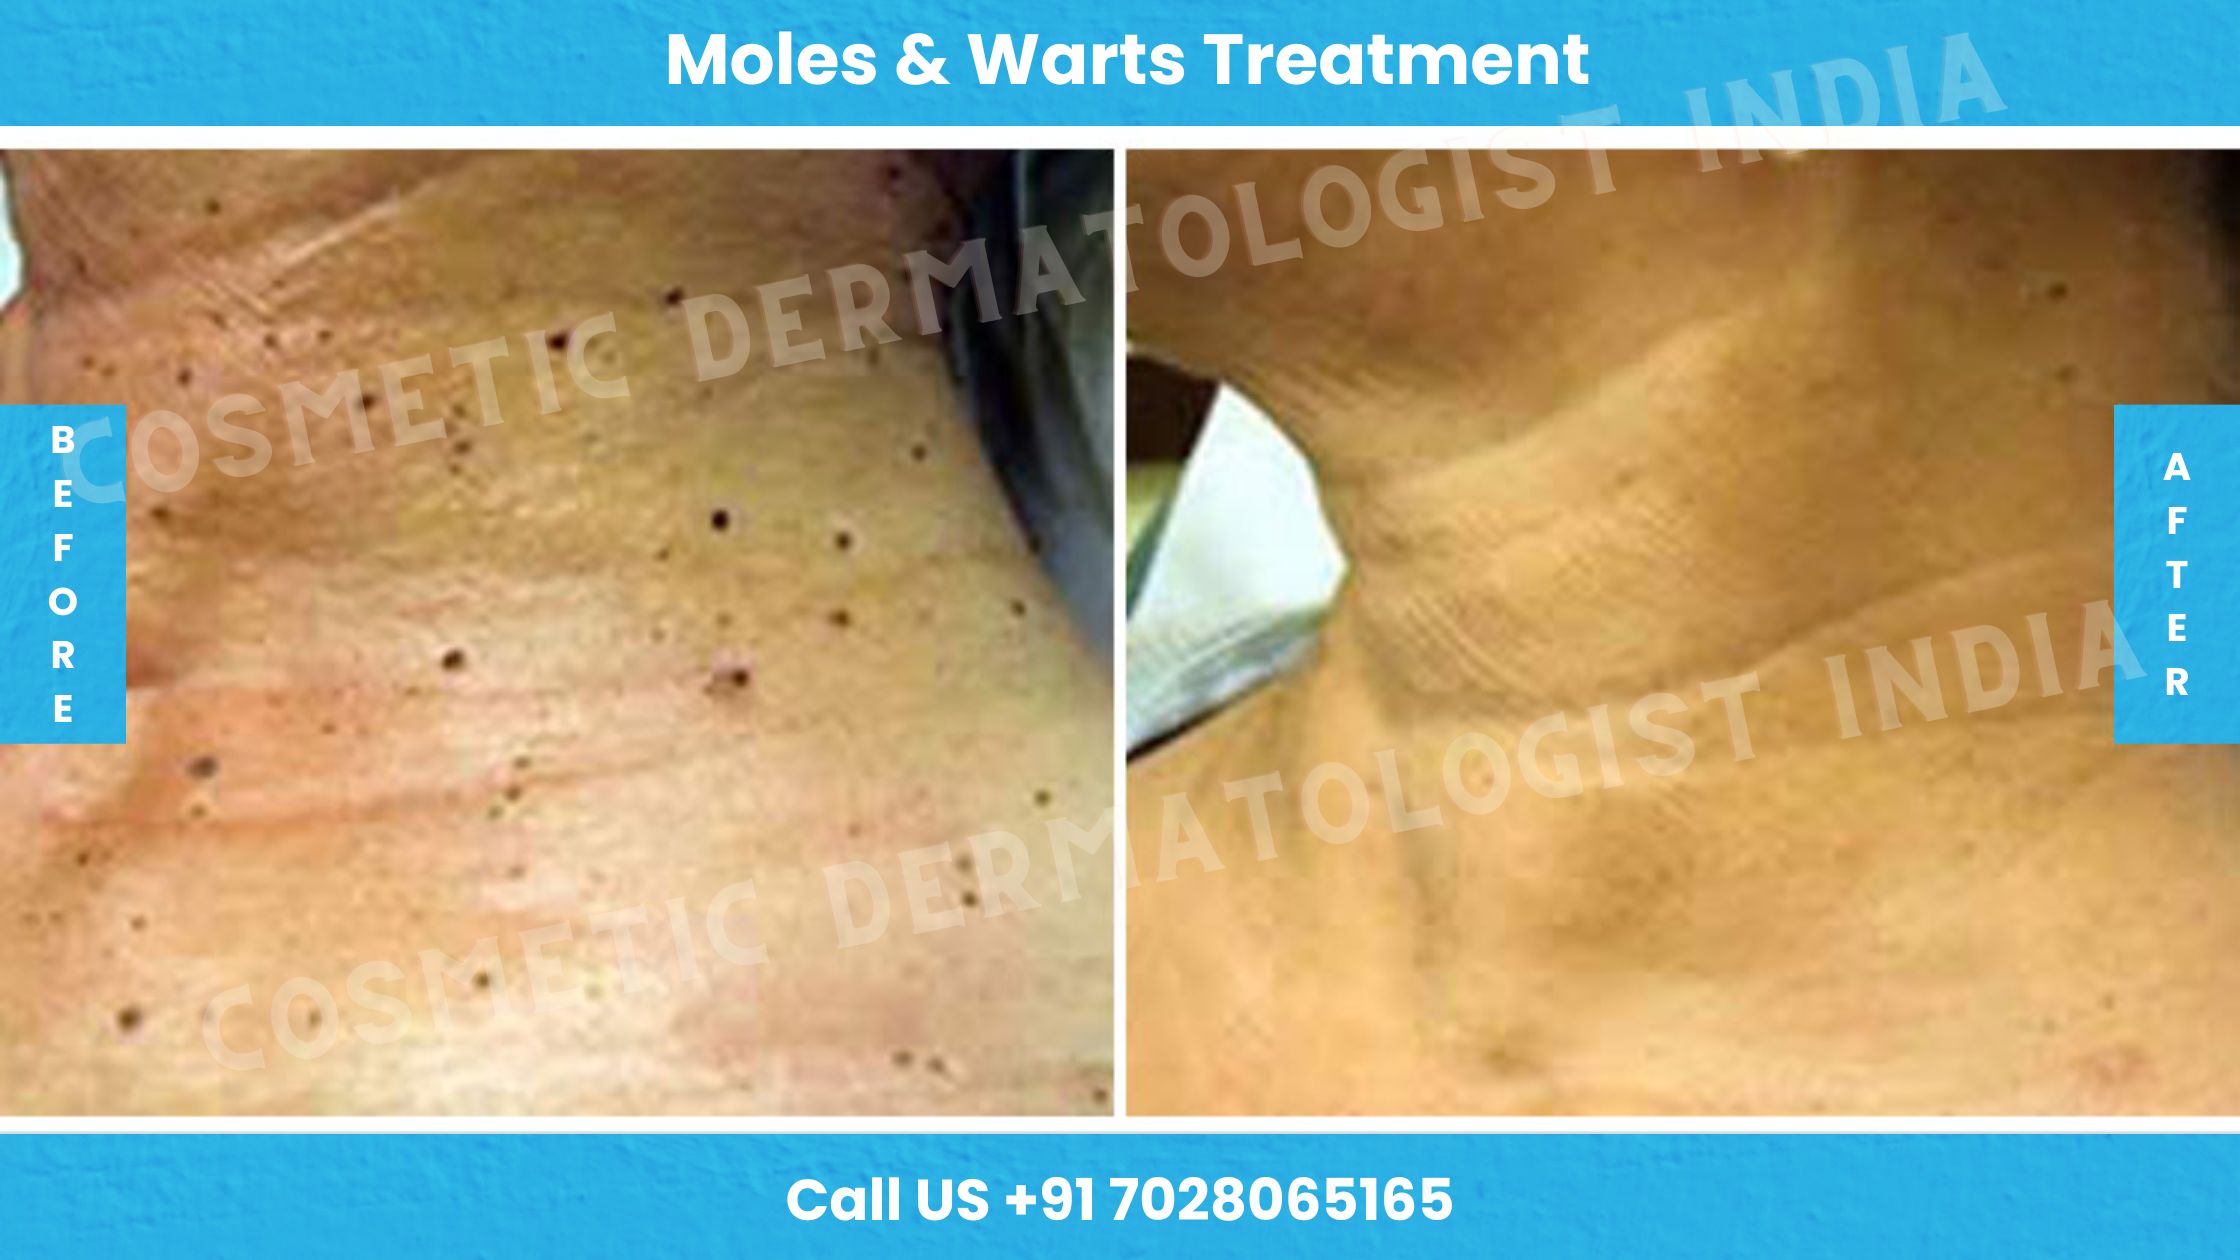 Before and After Images of Moles and Warts Treatment